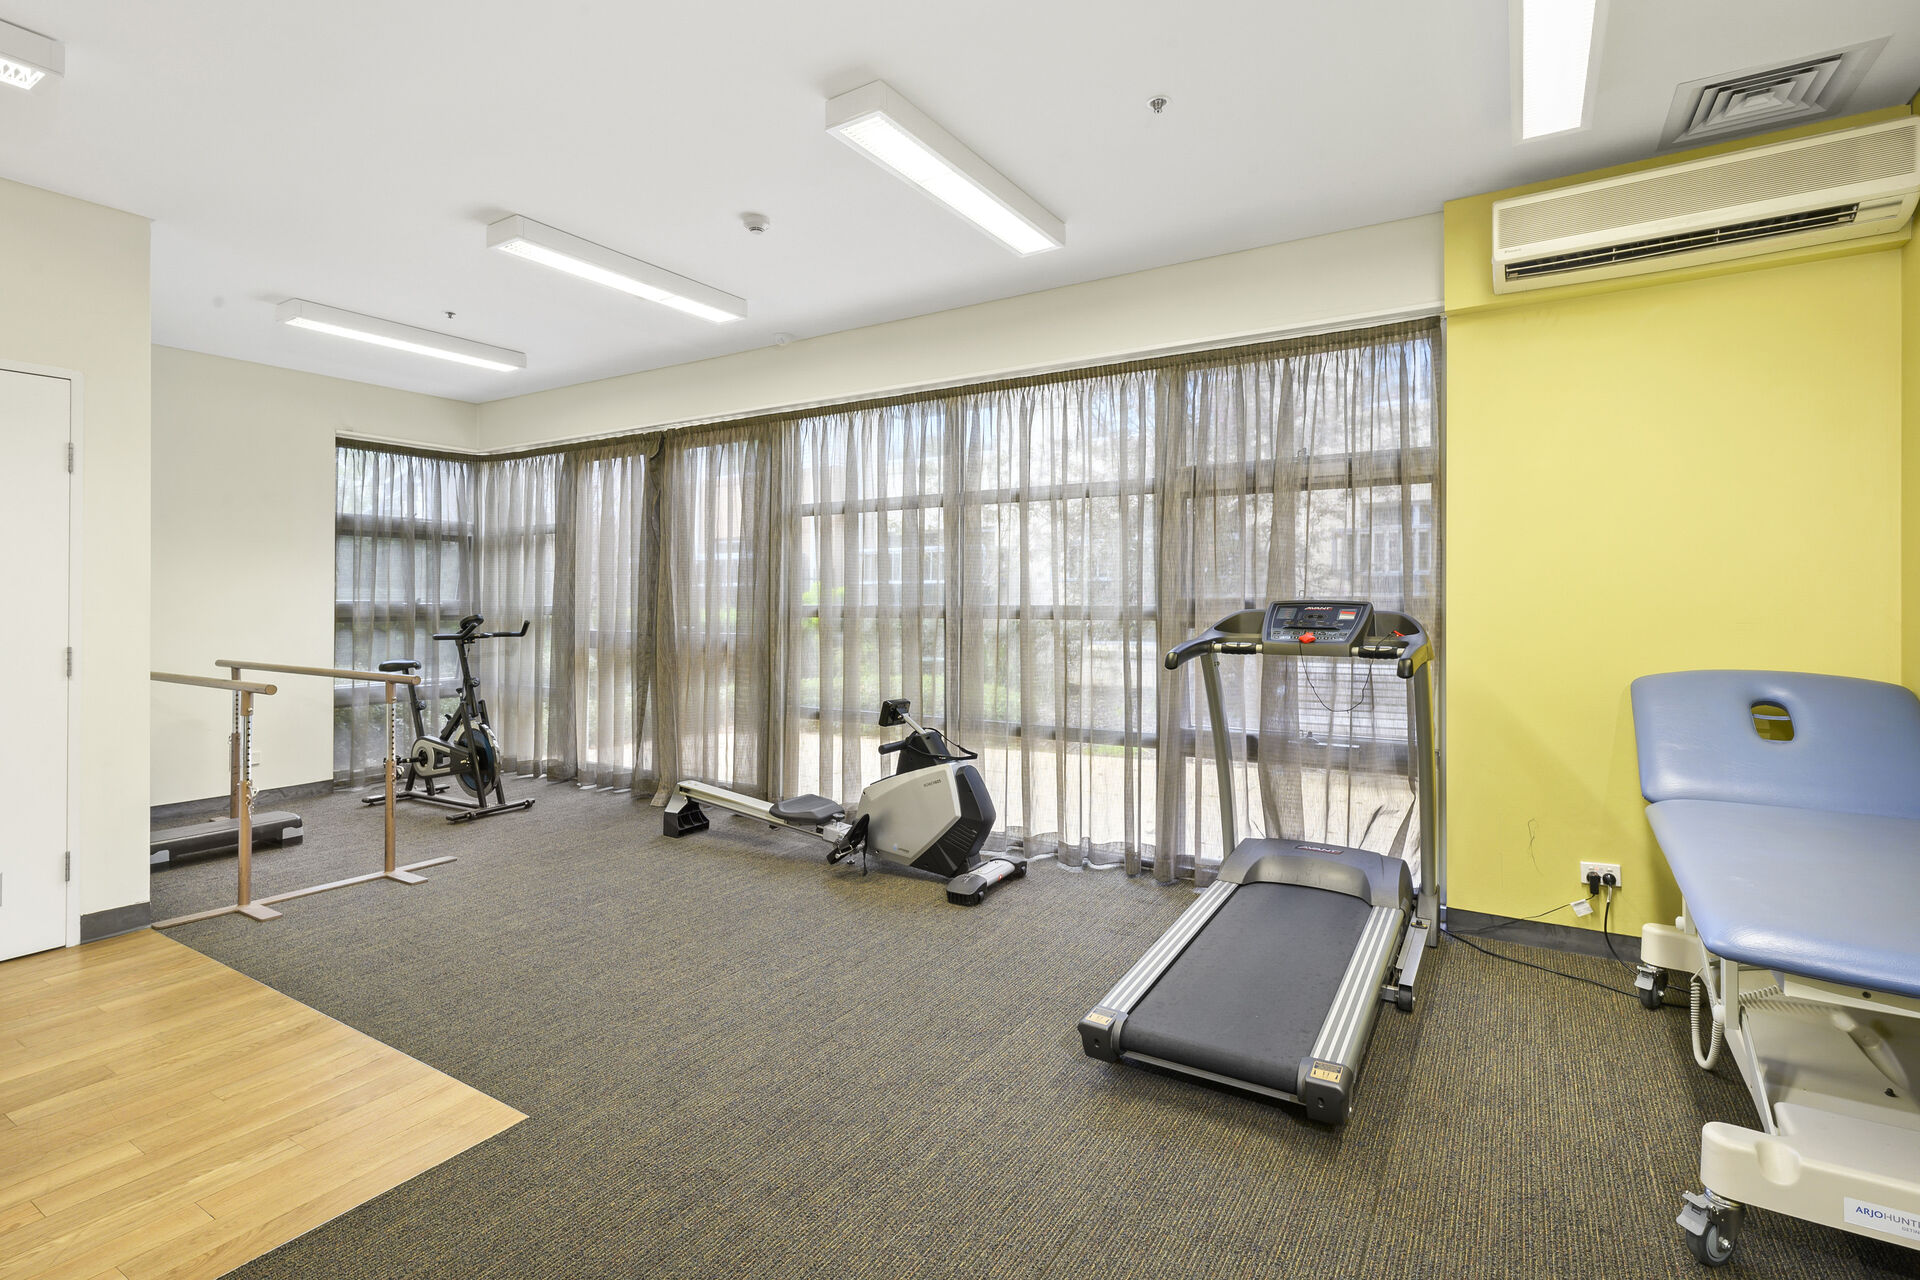 gym and physiotherapy room area for nursing home residents at baptistcare griffith residential aged care home